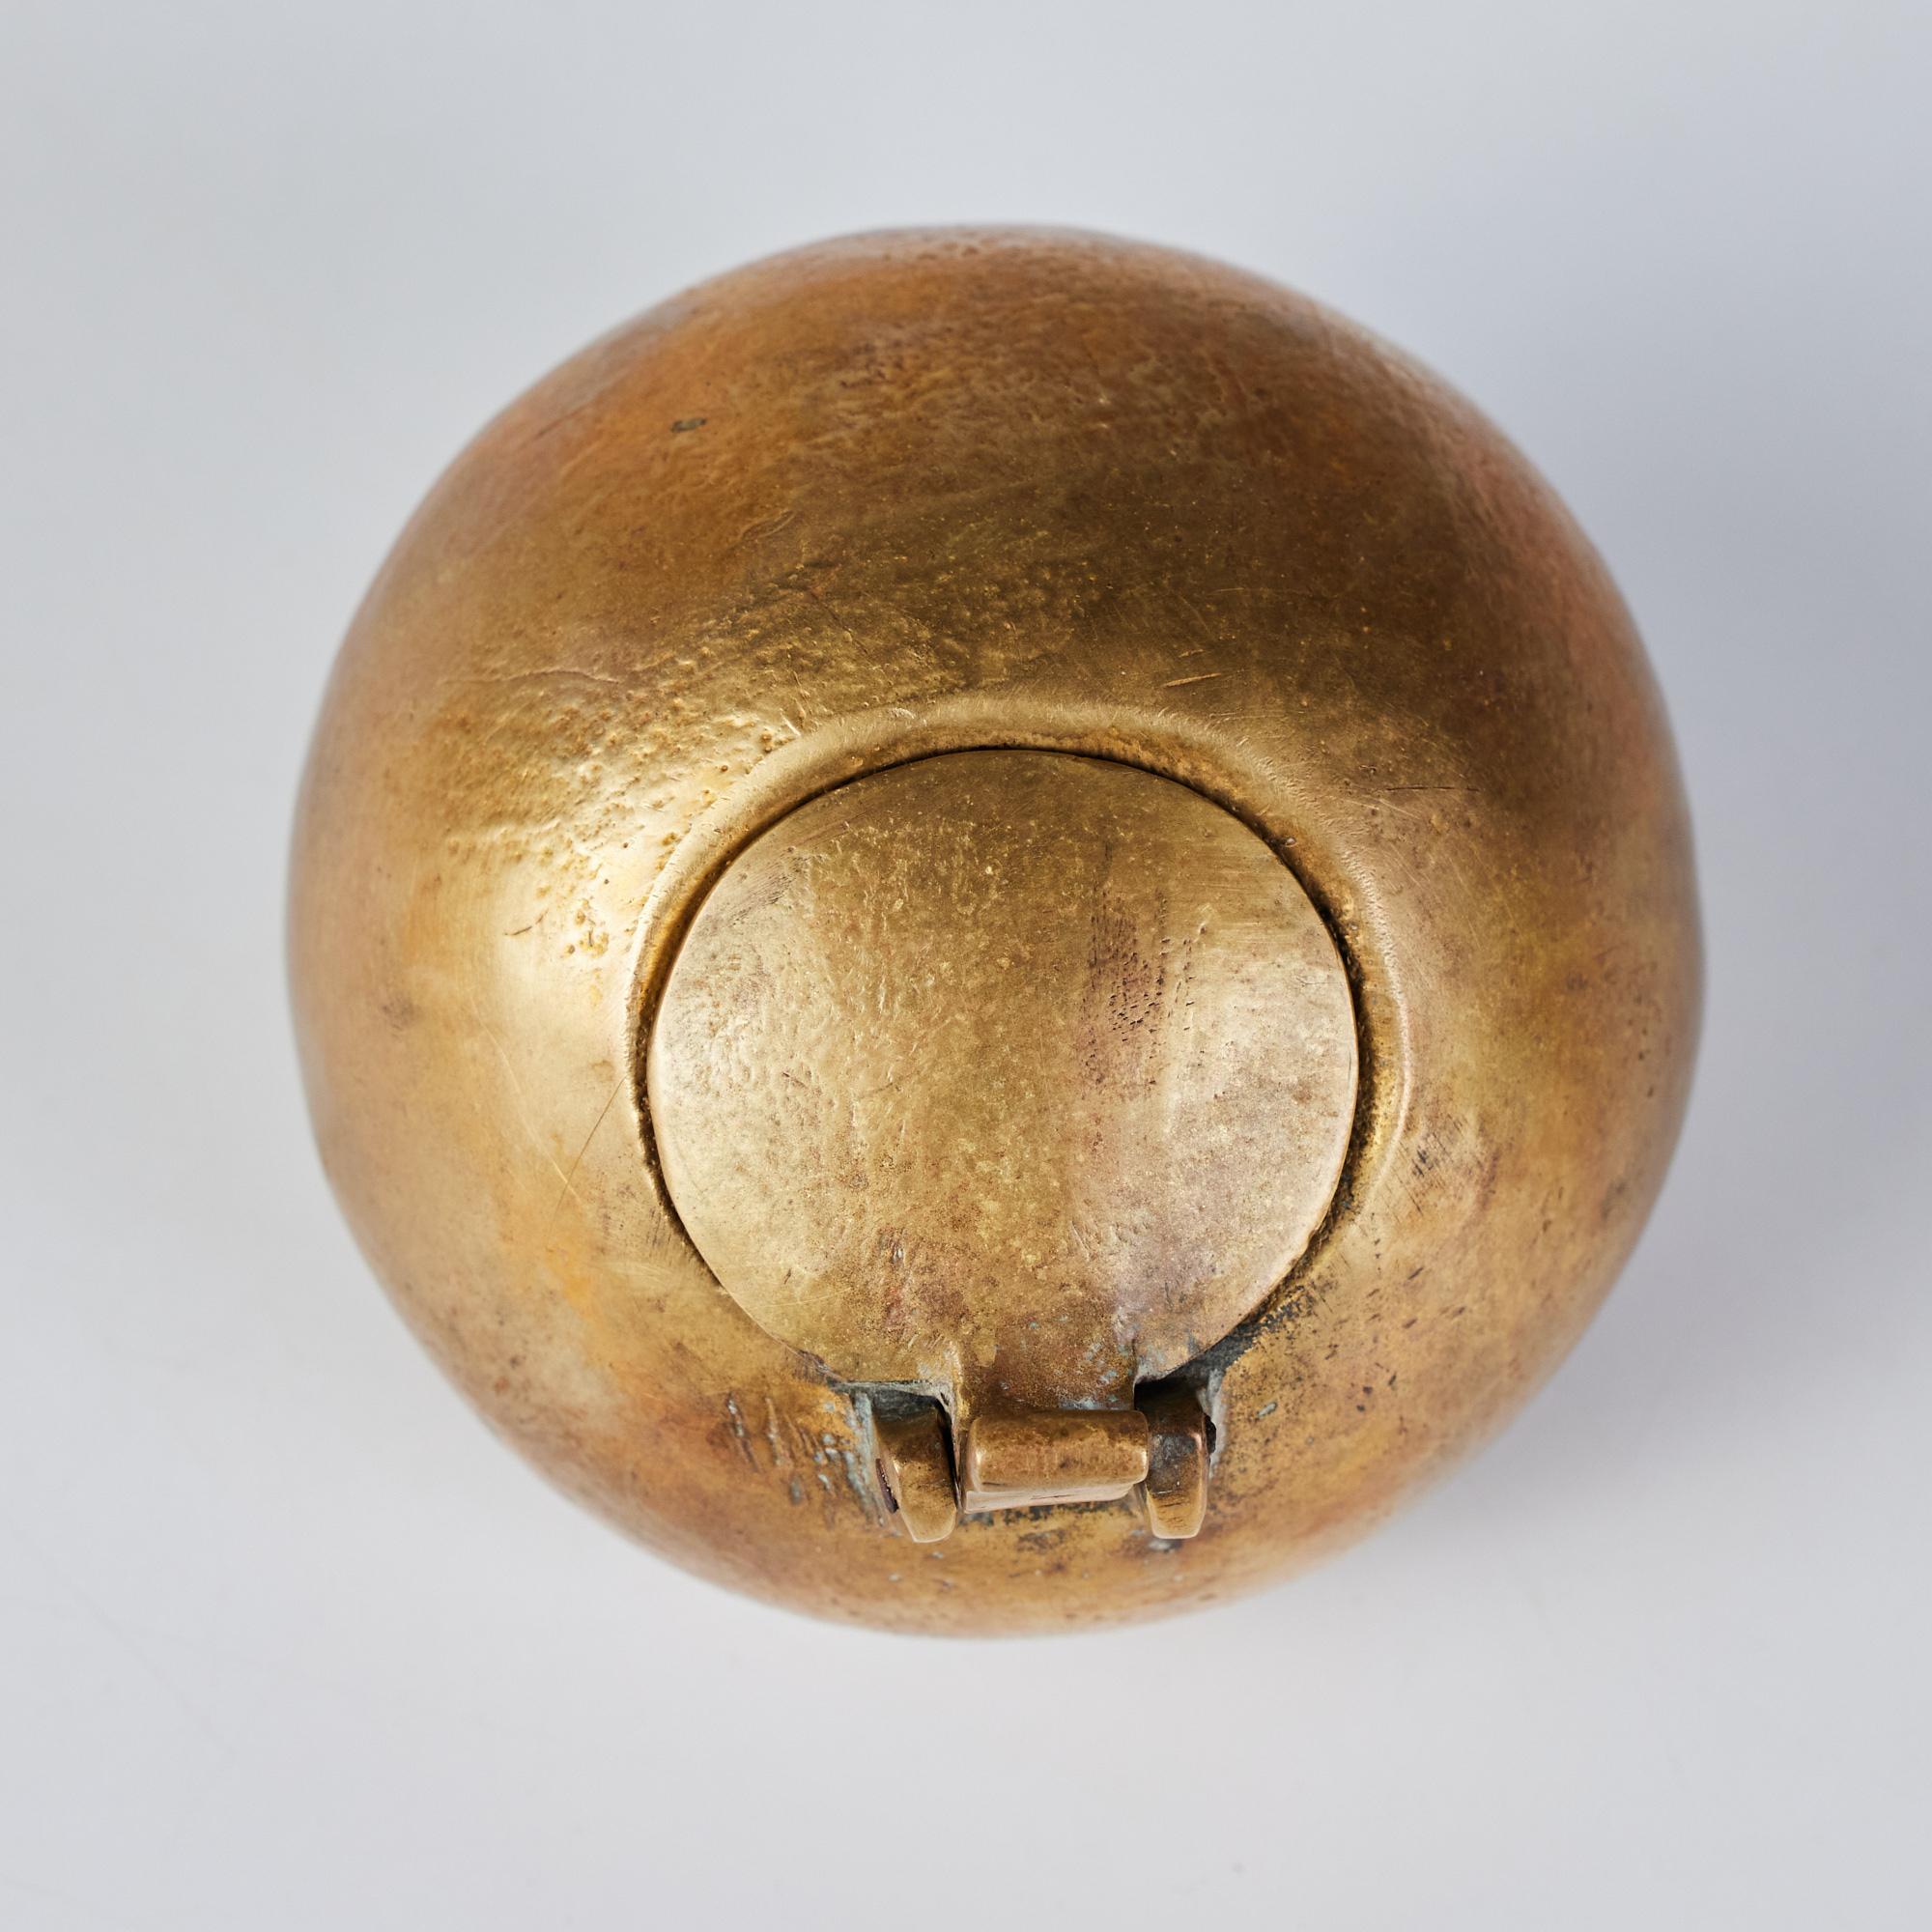 Italian Patinated Bronze Spherical Ashtray with Flip-Top Lid